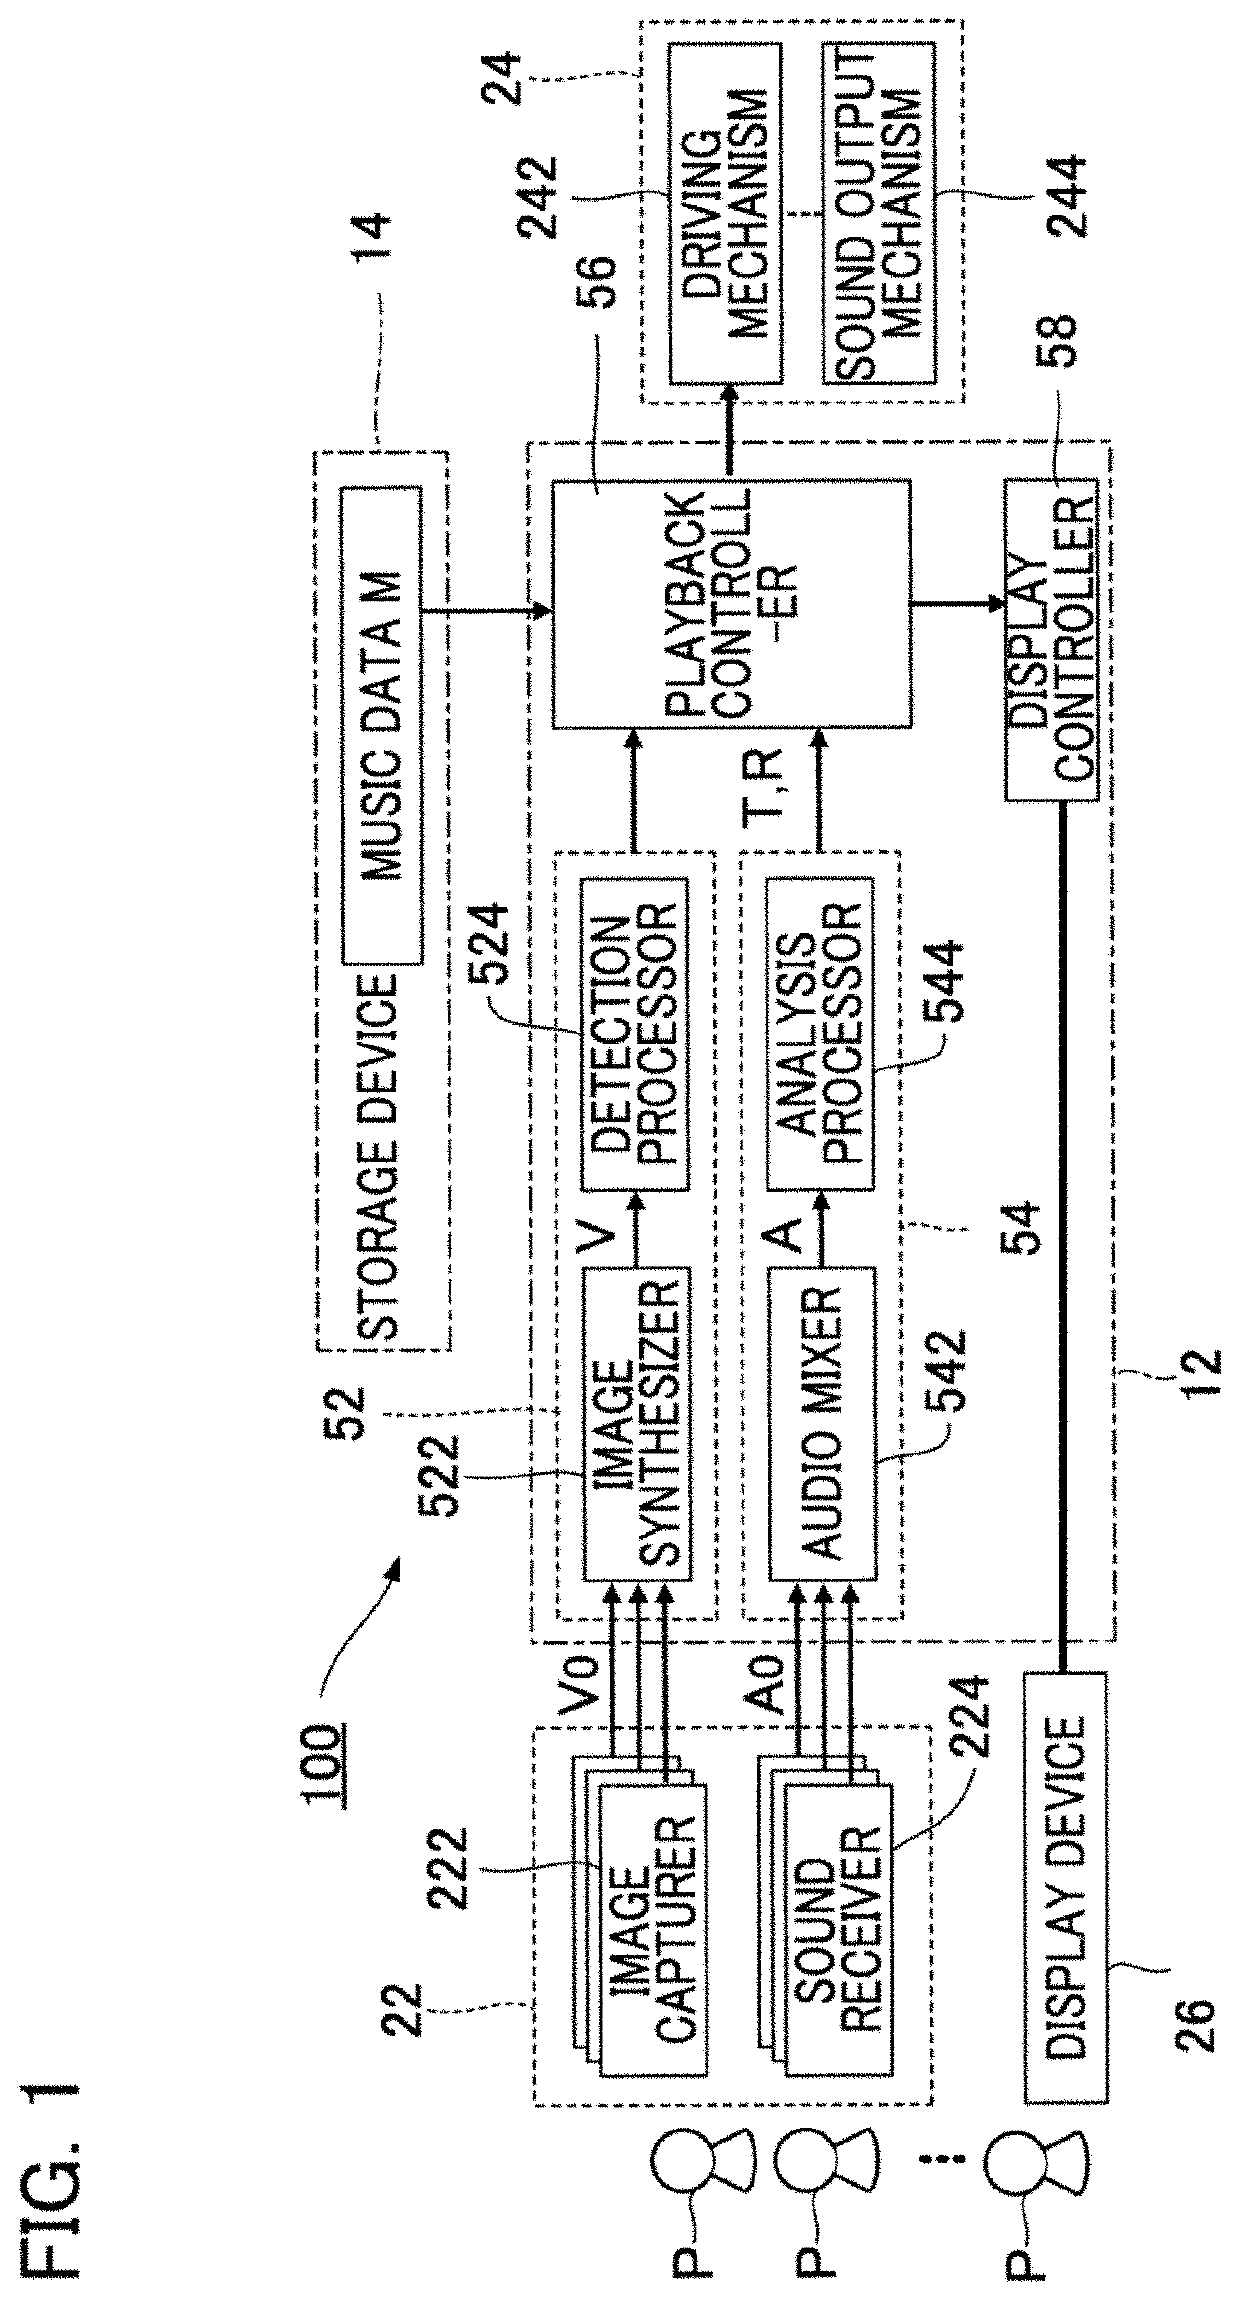 Apparatus for analyzing musical performance, performance analysis method, automatic playback method, and automatic player system